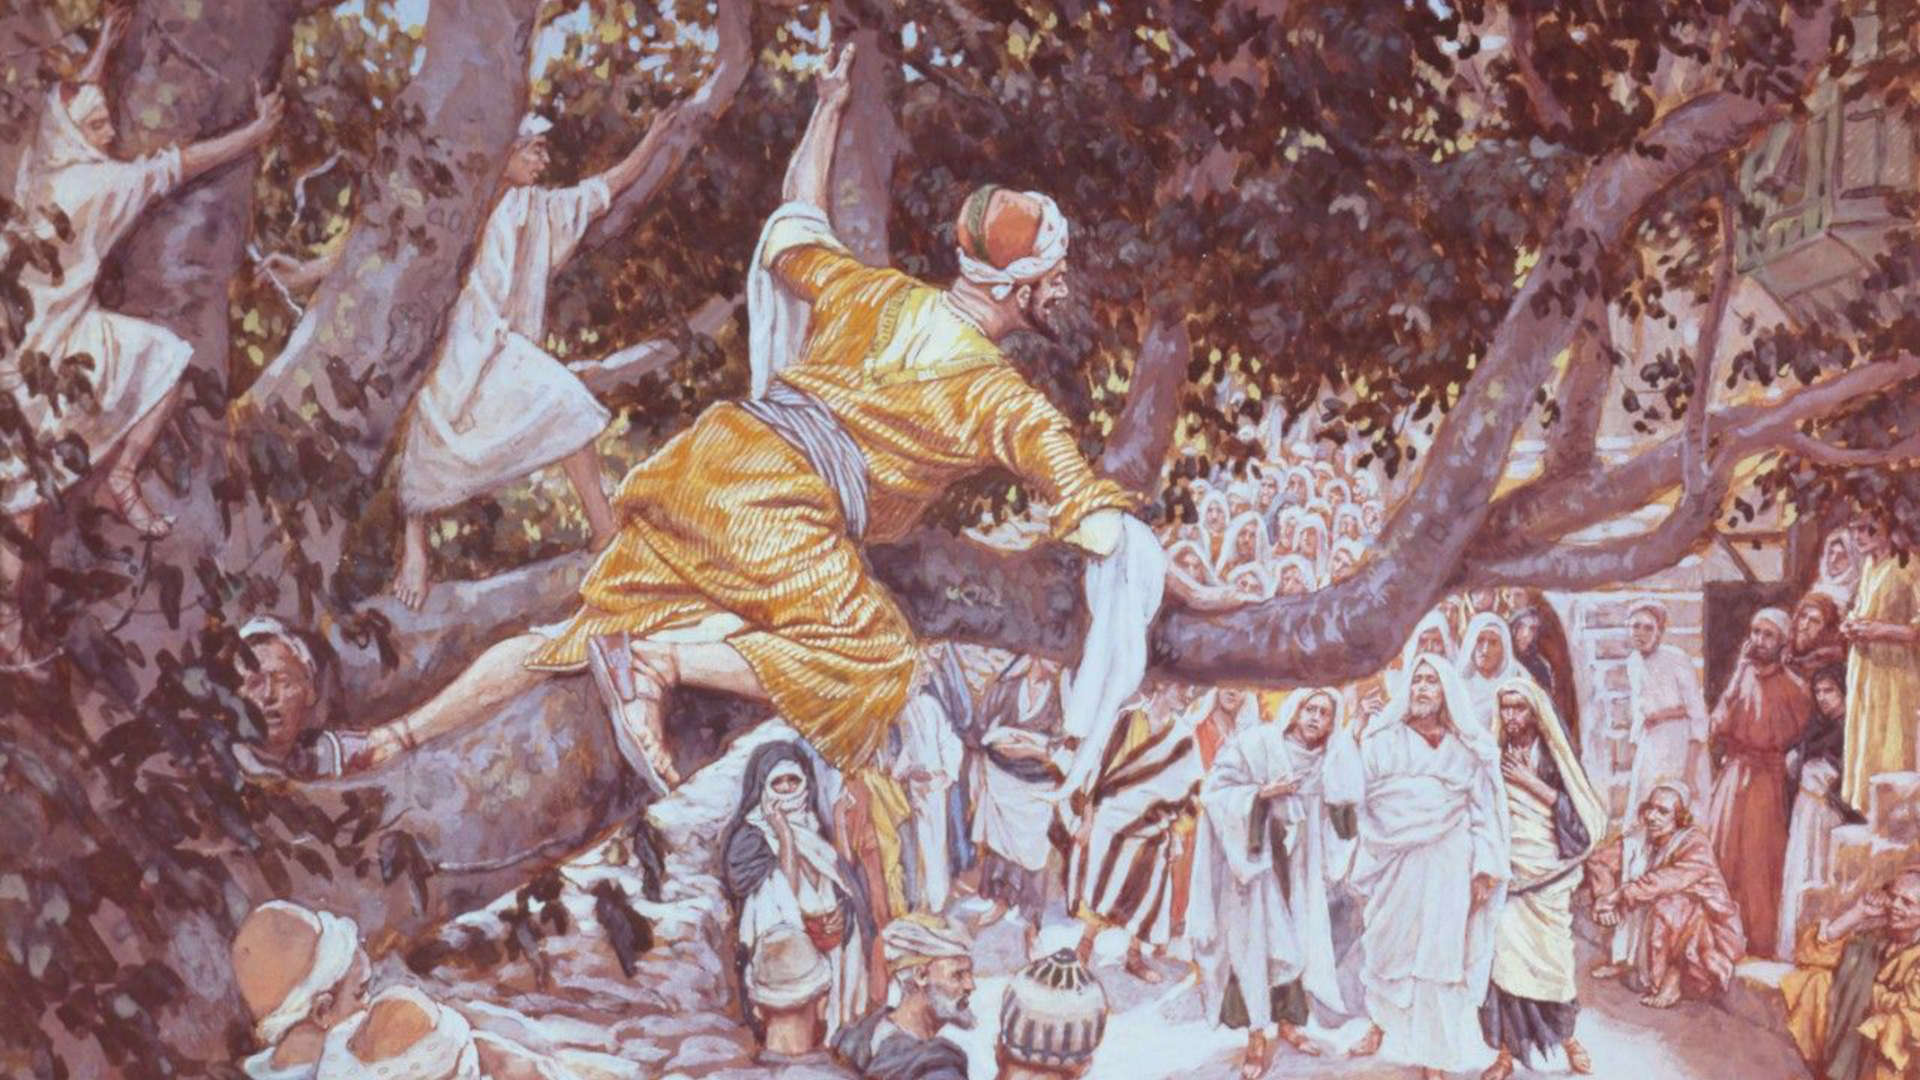 James Tissot's painting, "Zacchaeus in the Sycamore Tree," depicting Jesus calling up to a man looking at him and holding himself up in the branches of a tree